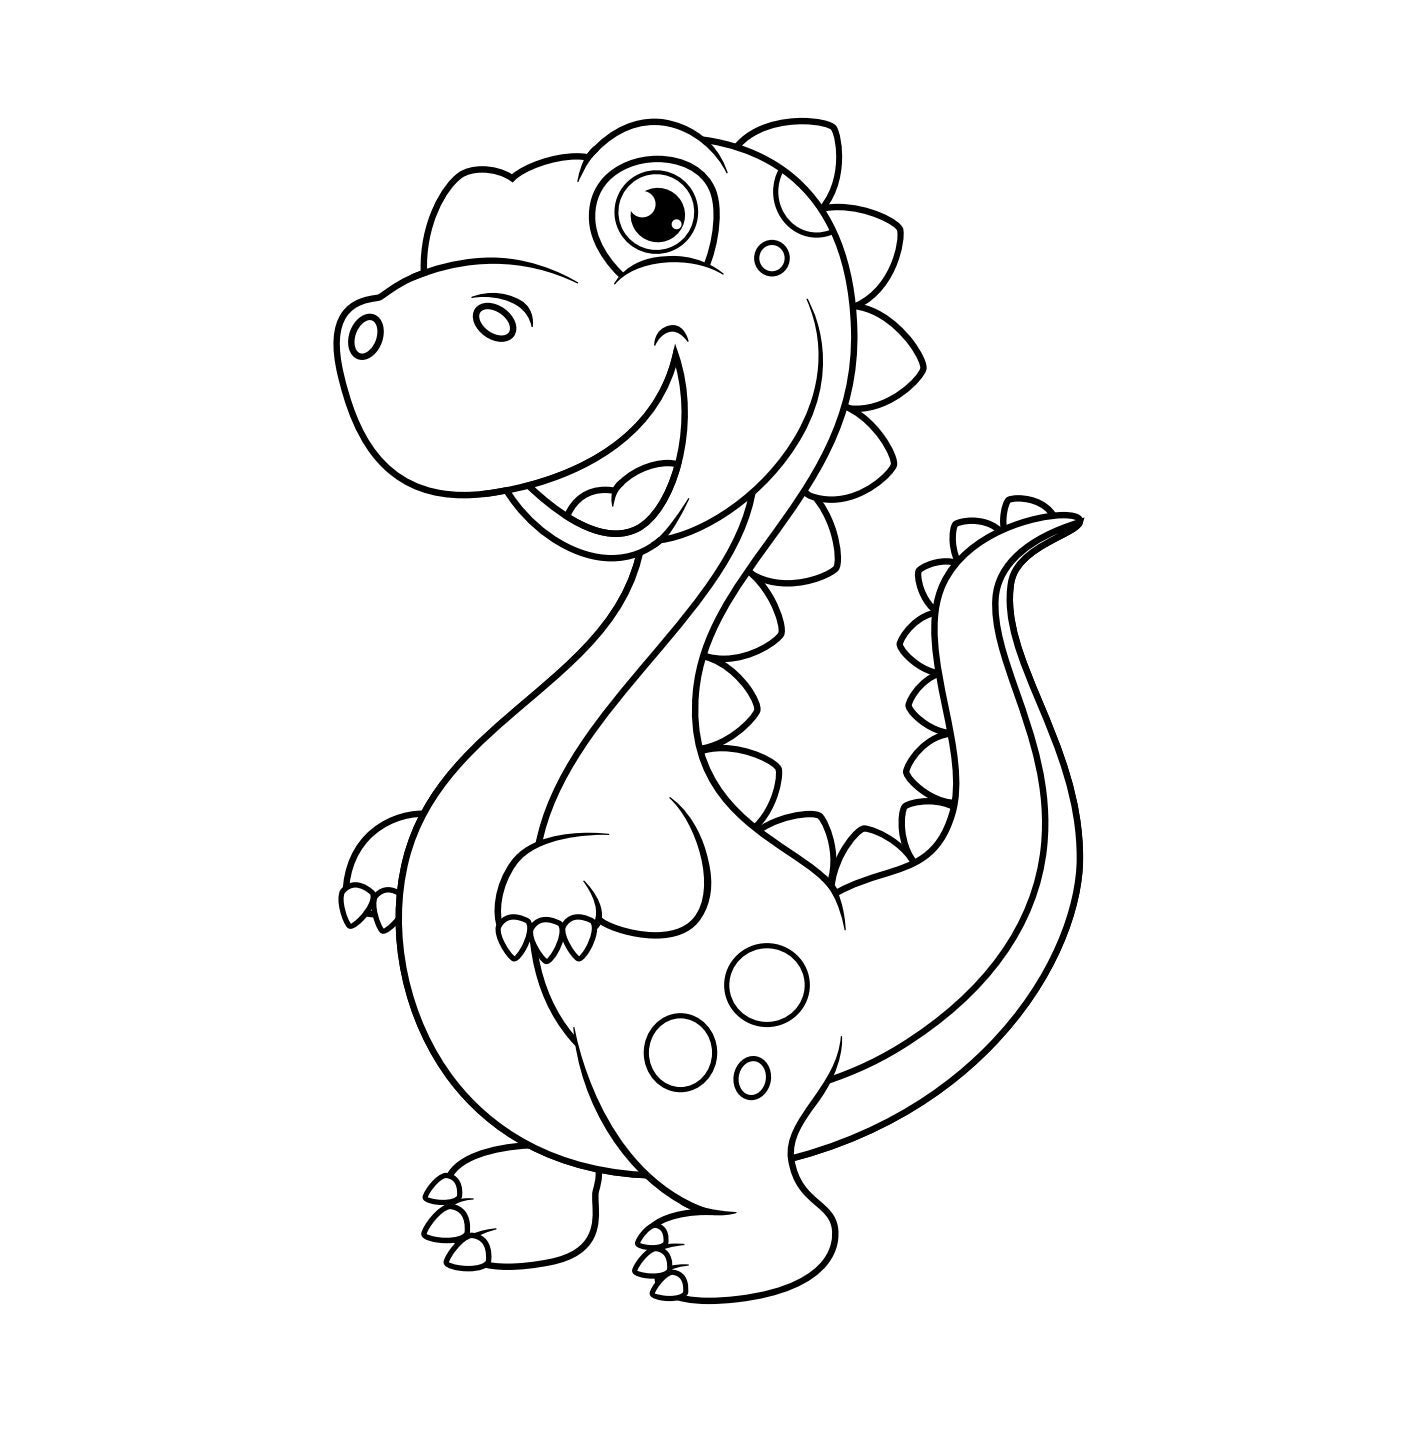 Printable dinosaur coloring pages instant download pdf